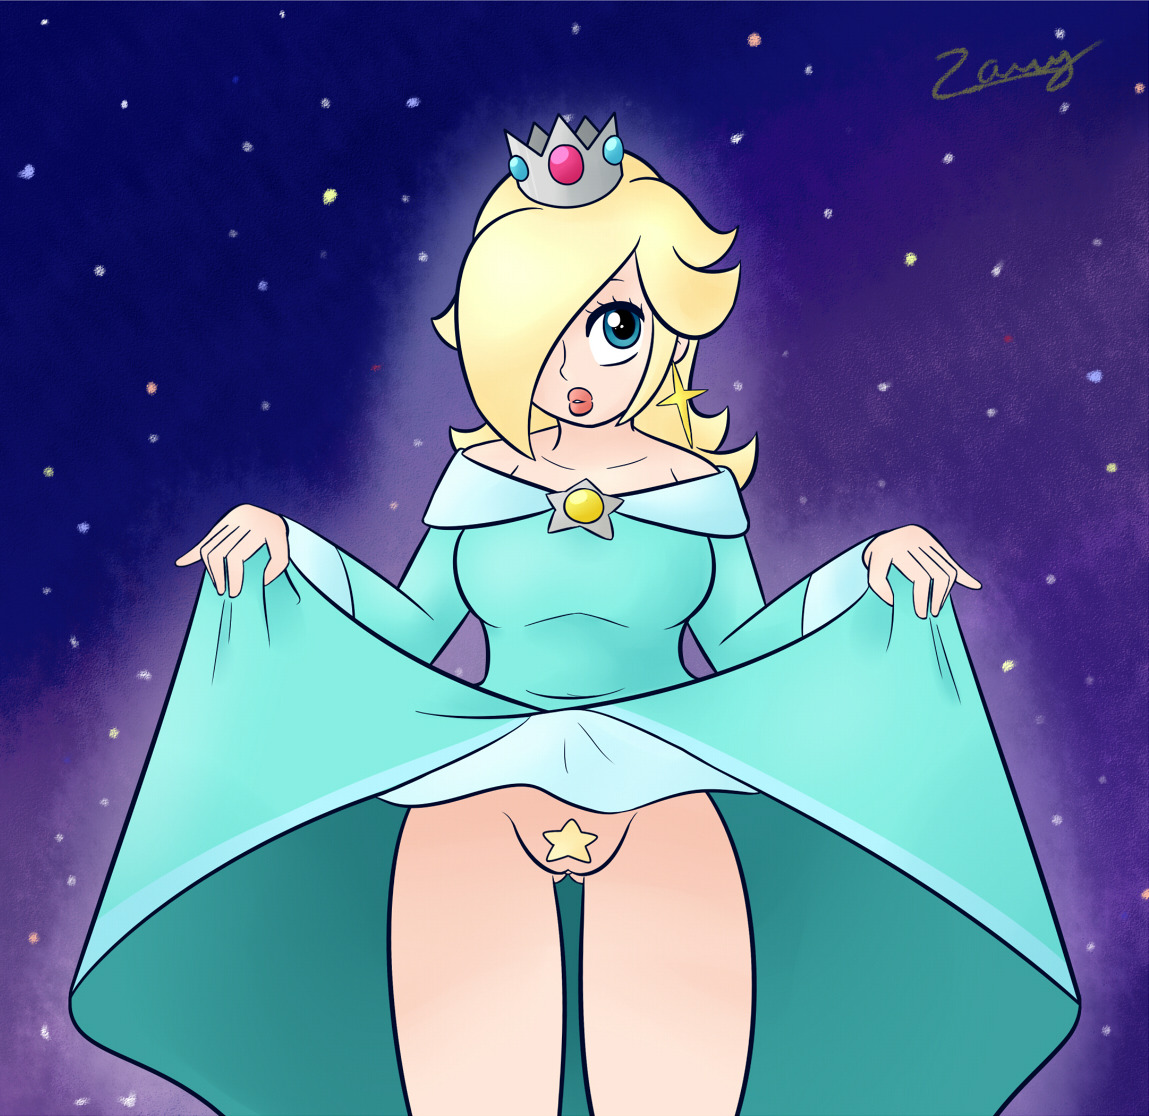 She is out of this world!-High Quality-